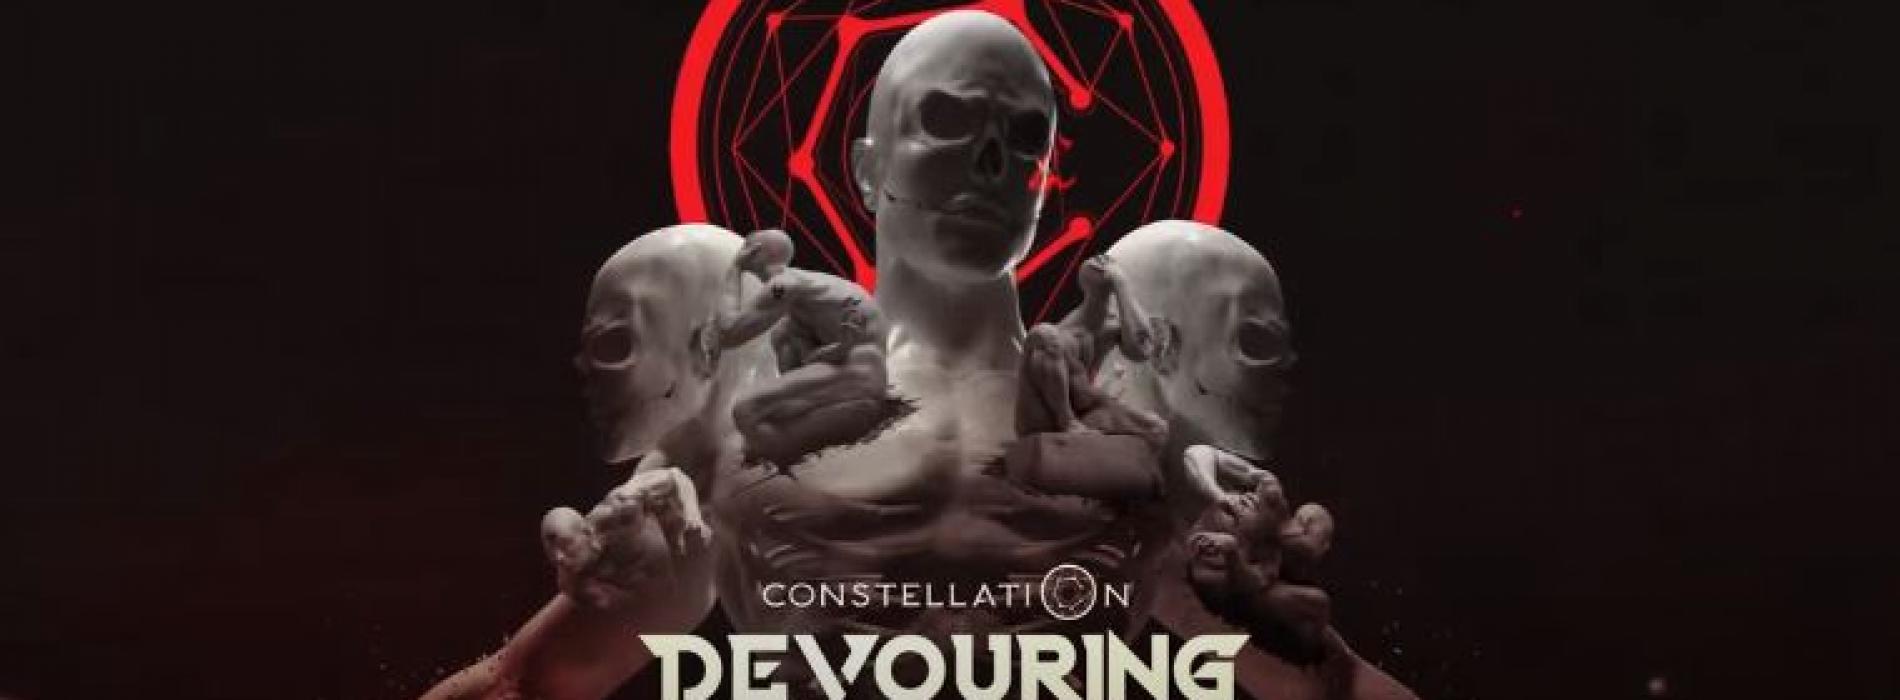 New Music : Constellation – Devouring The Sun (Official Lyric Video)